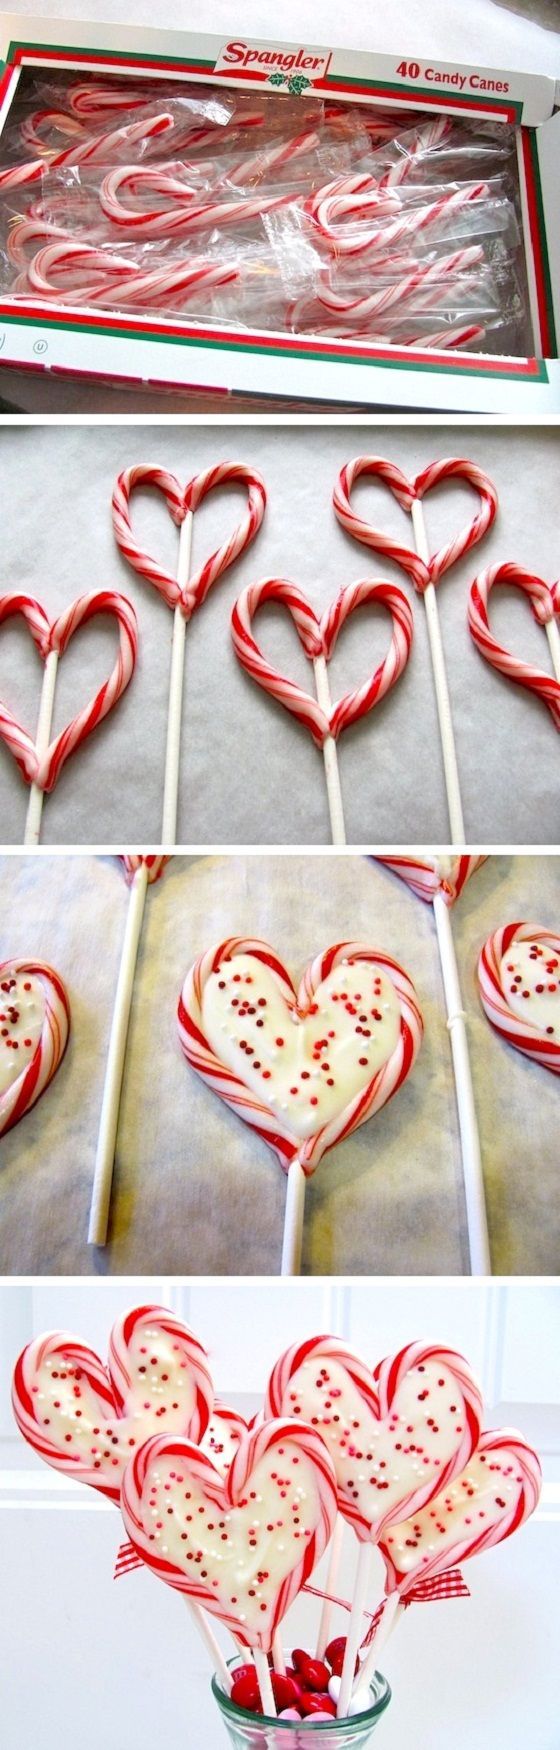 Candy Cane heart shaped lollipop. Just bake at 300F for 3 minutes, then quickly